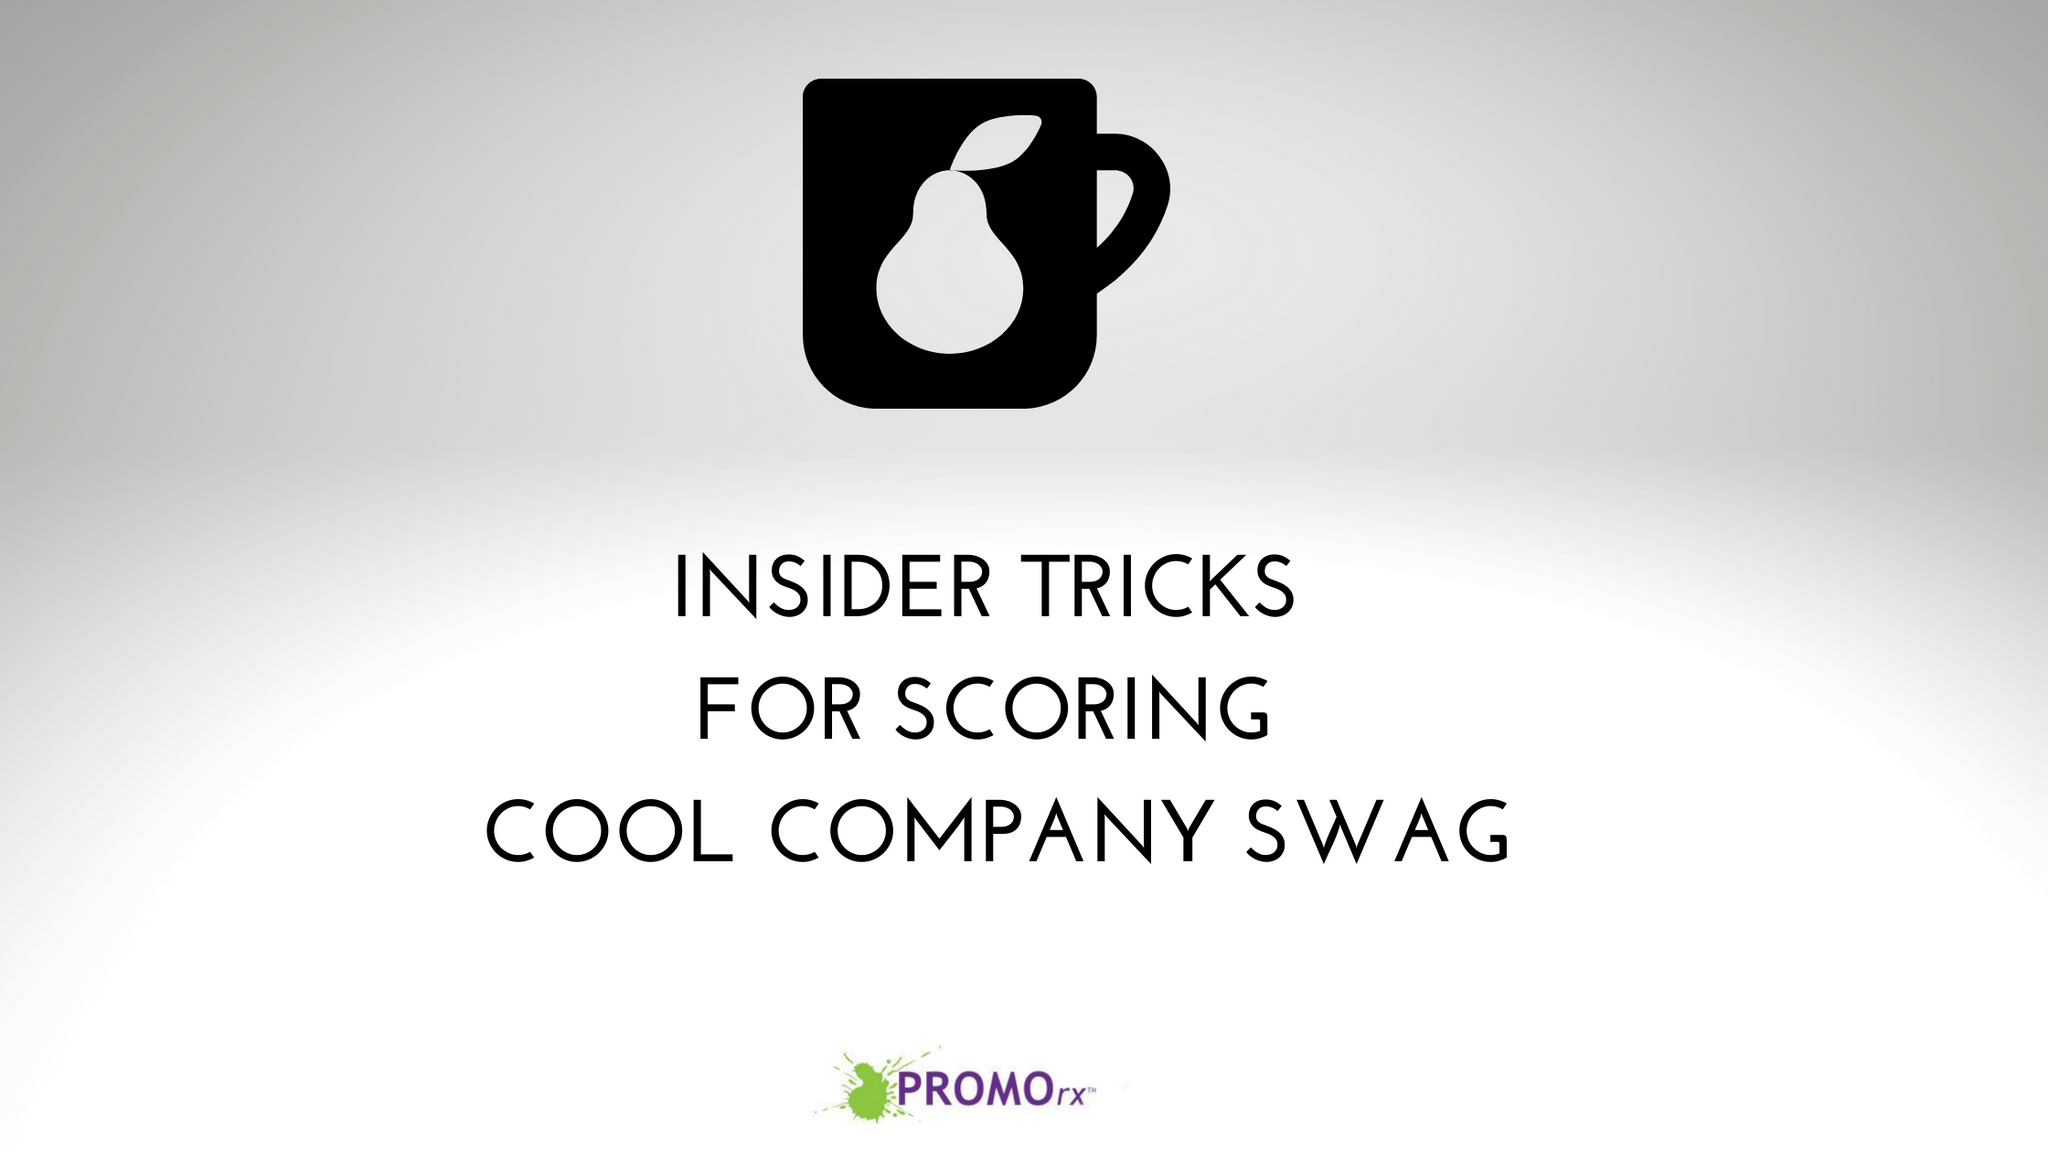 Insider Tricks for Scoring Cool Company Swag